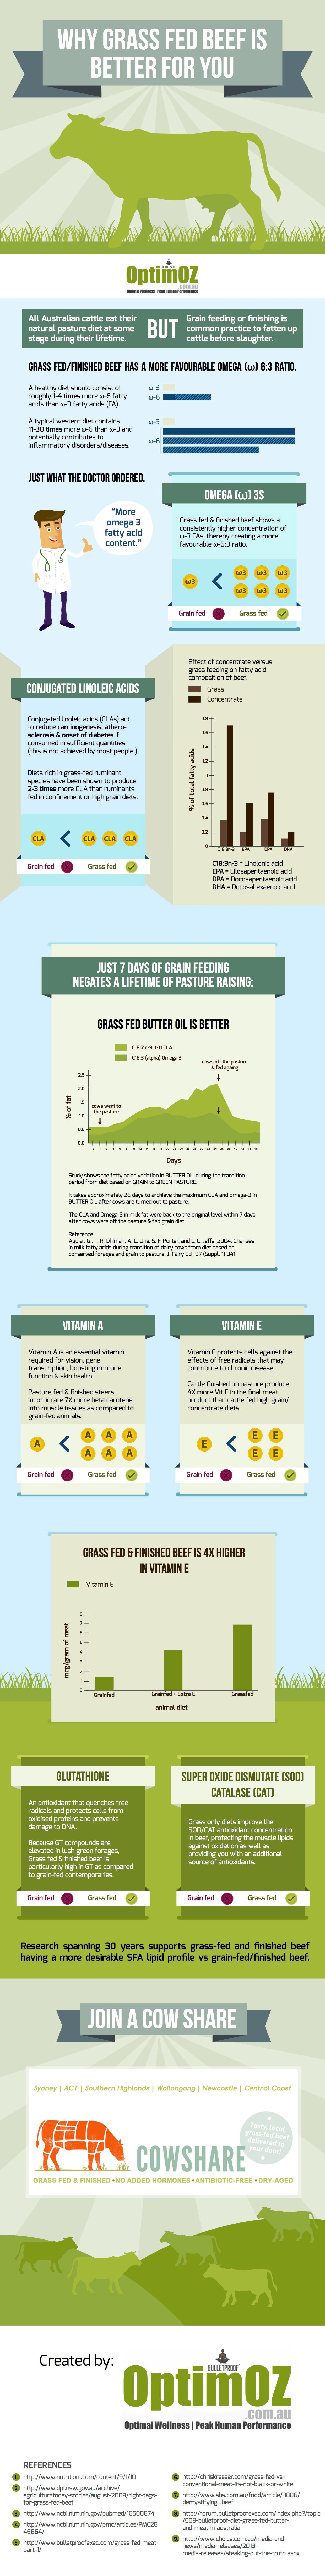 Grass Fed vs Grain Fed Beef Infographic